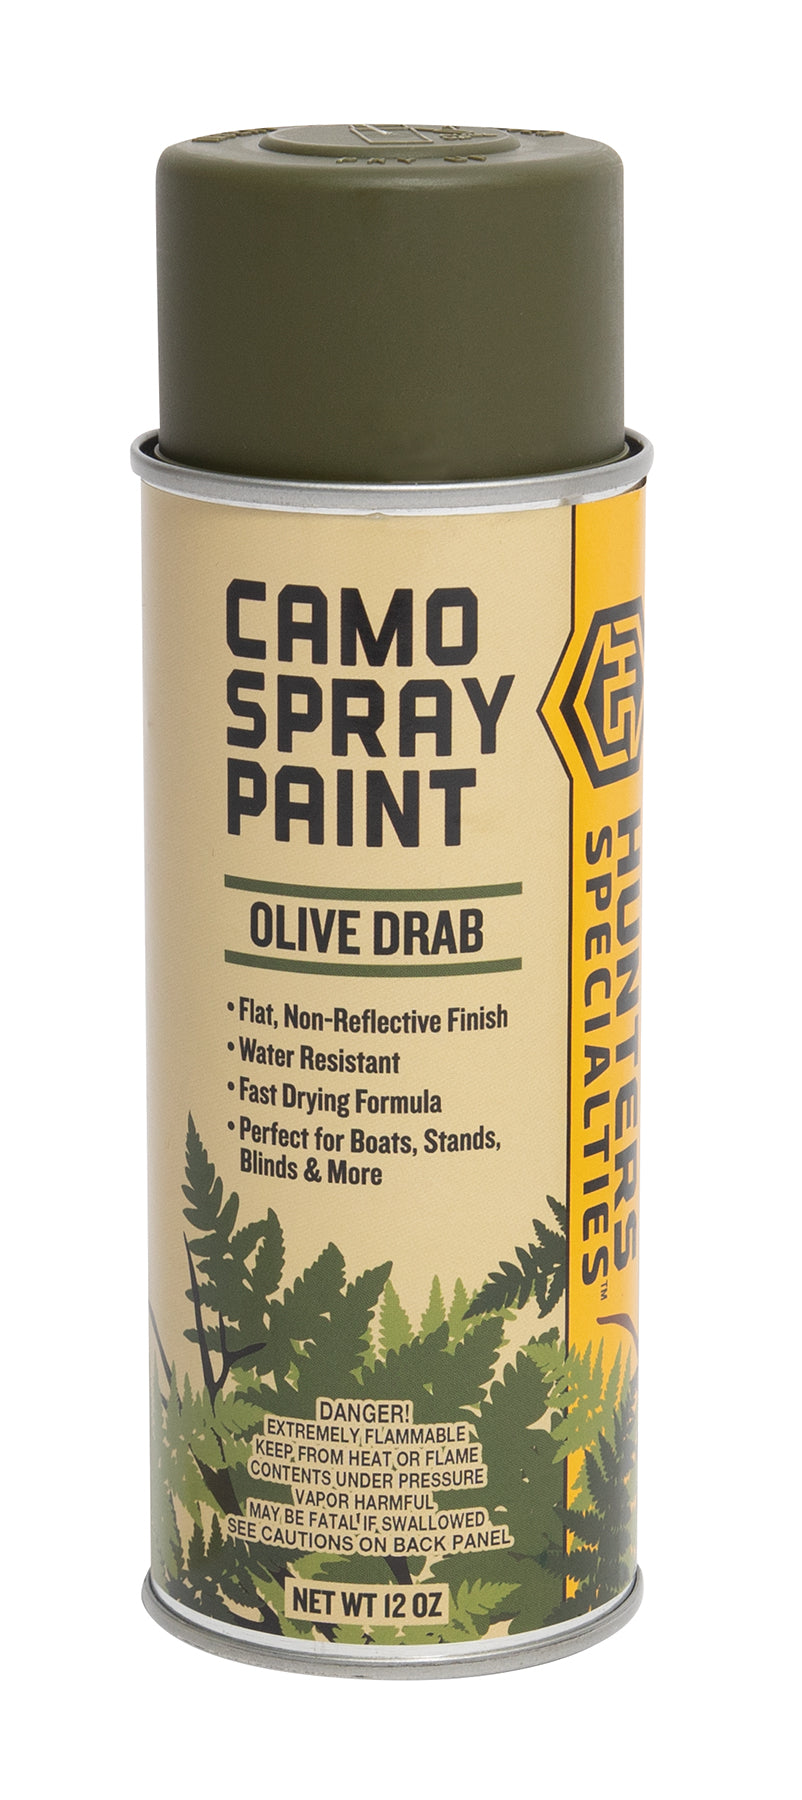 Camouflage Spray Paint 12oz - Olive Drab, (5 Per Pack)